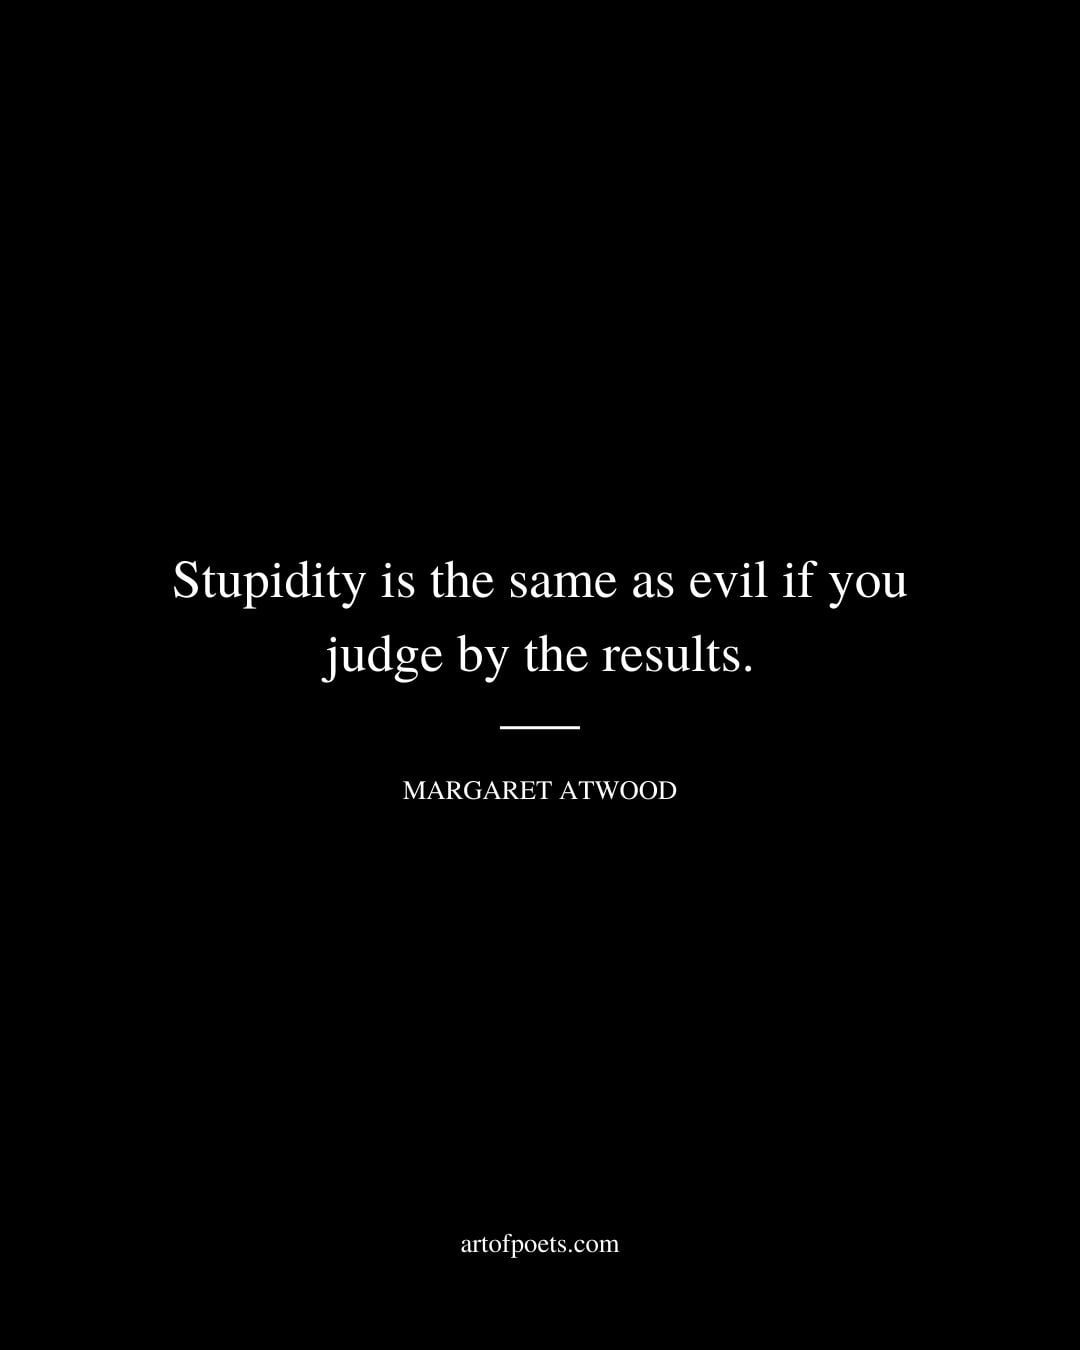 Stupidity is the same as evil if you judge by the results. Margaret Atwood 1